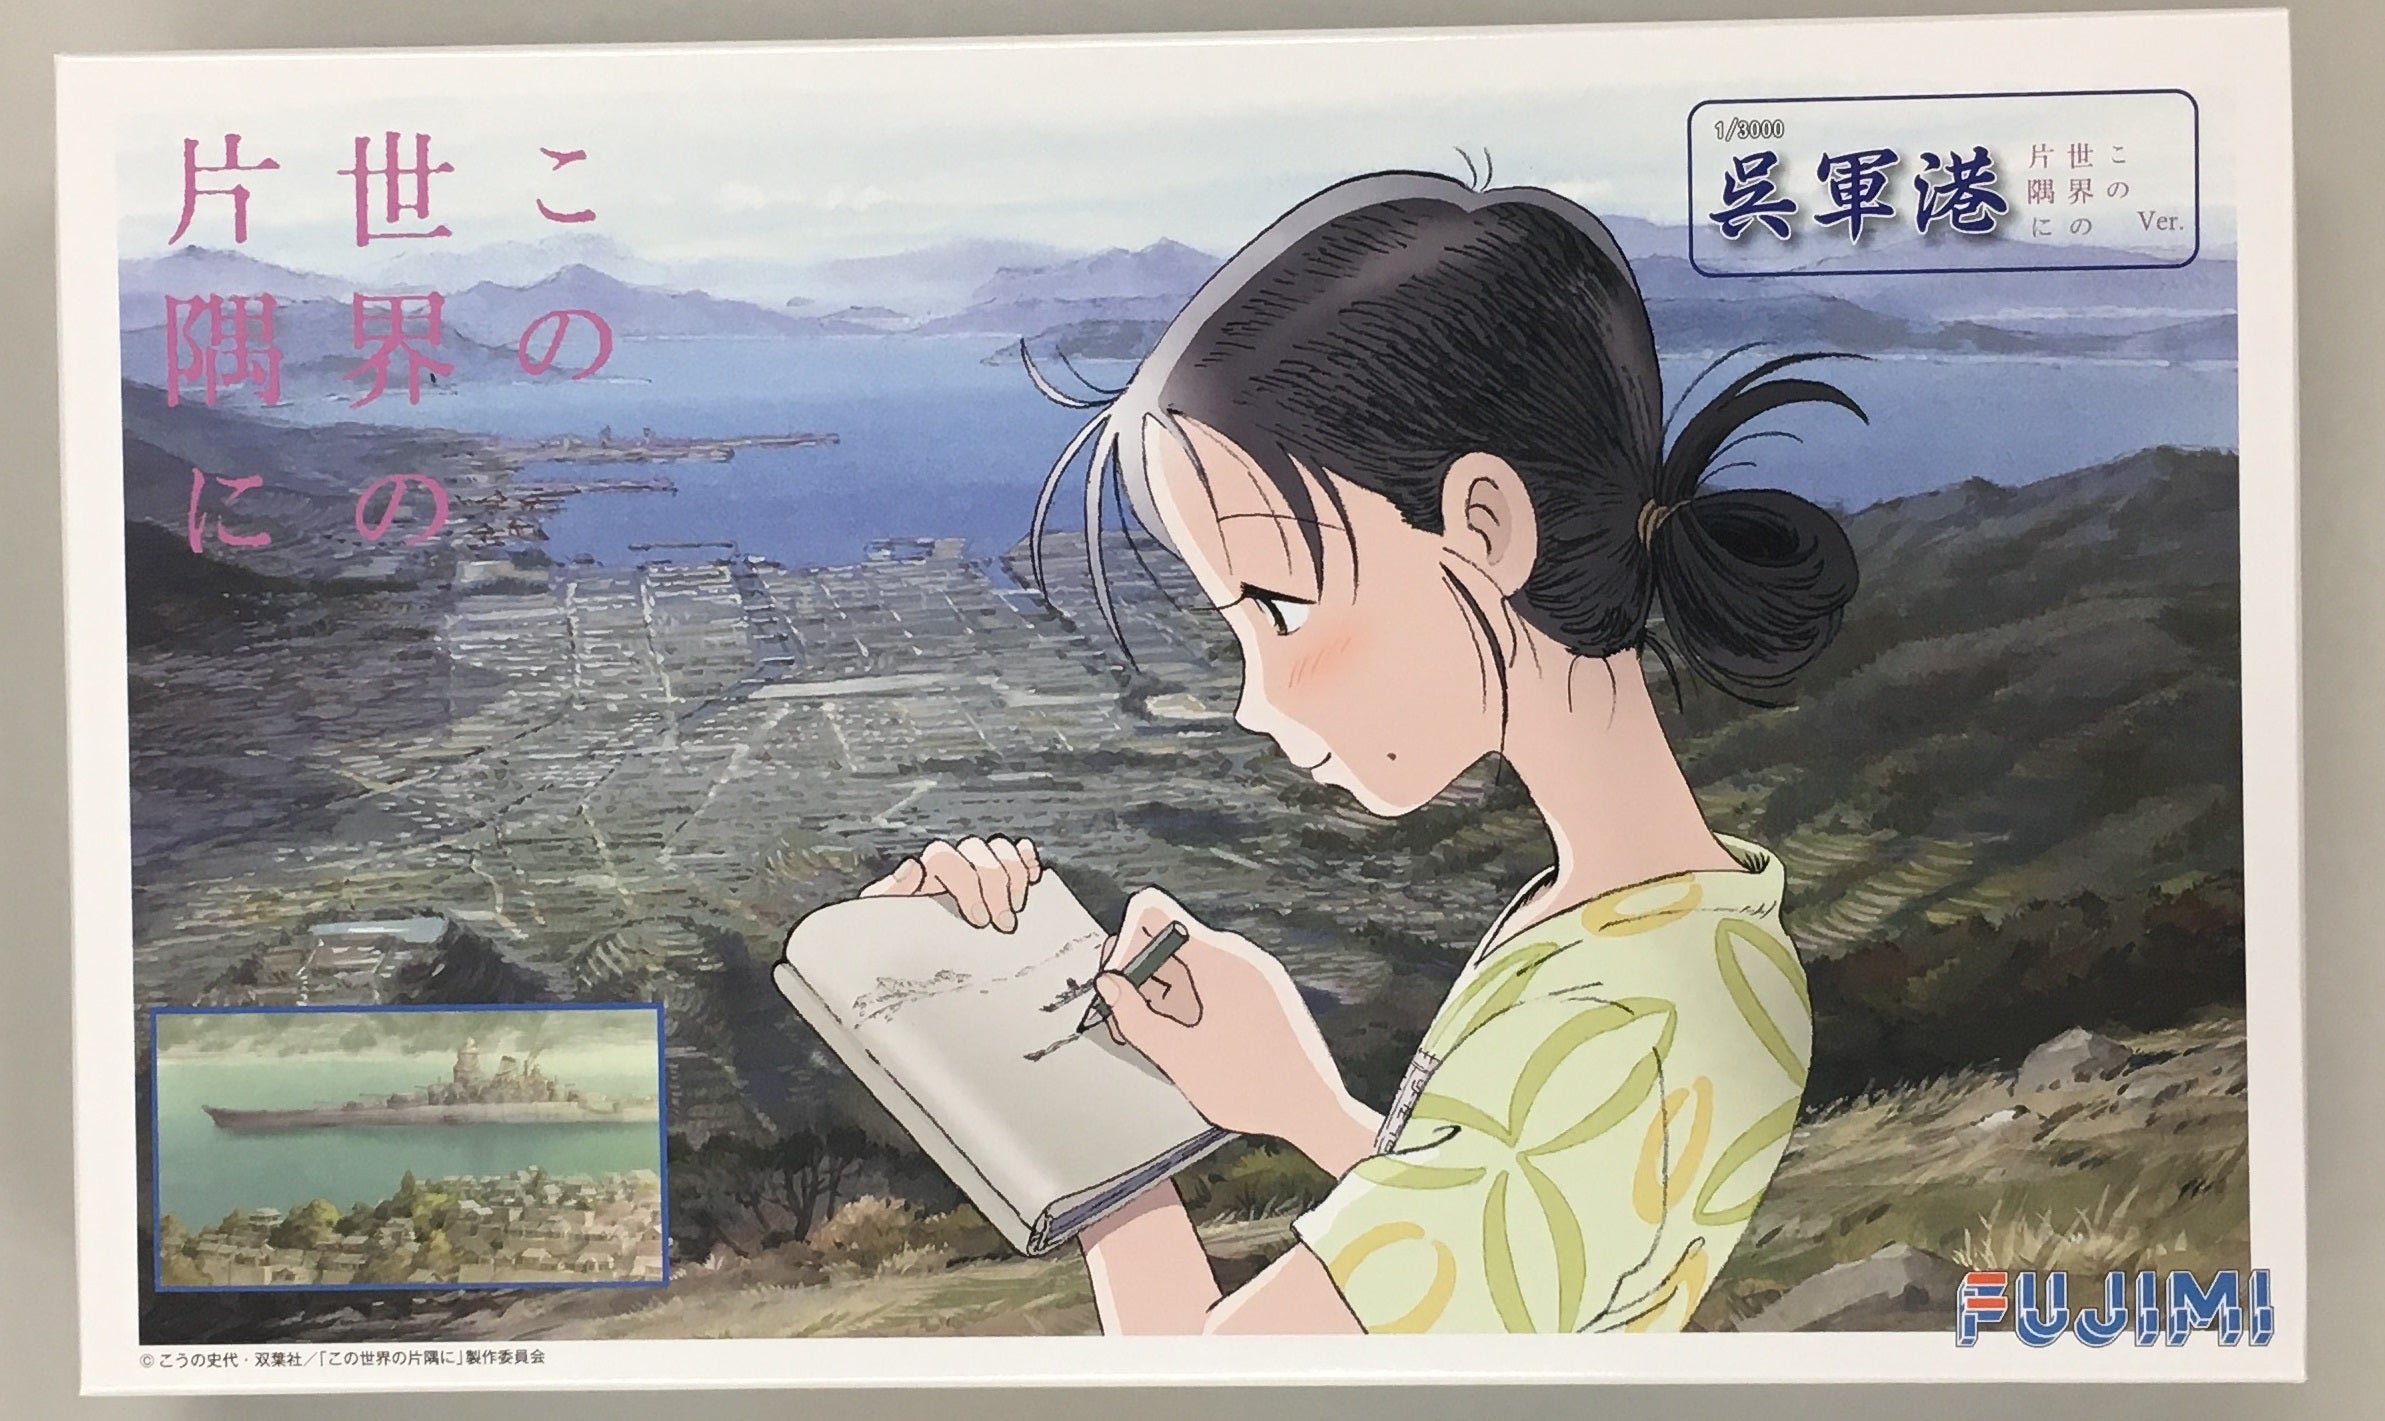 Kure Naval Port - In This Corner of the World